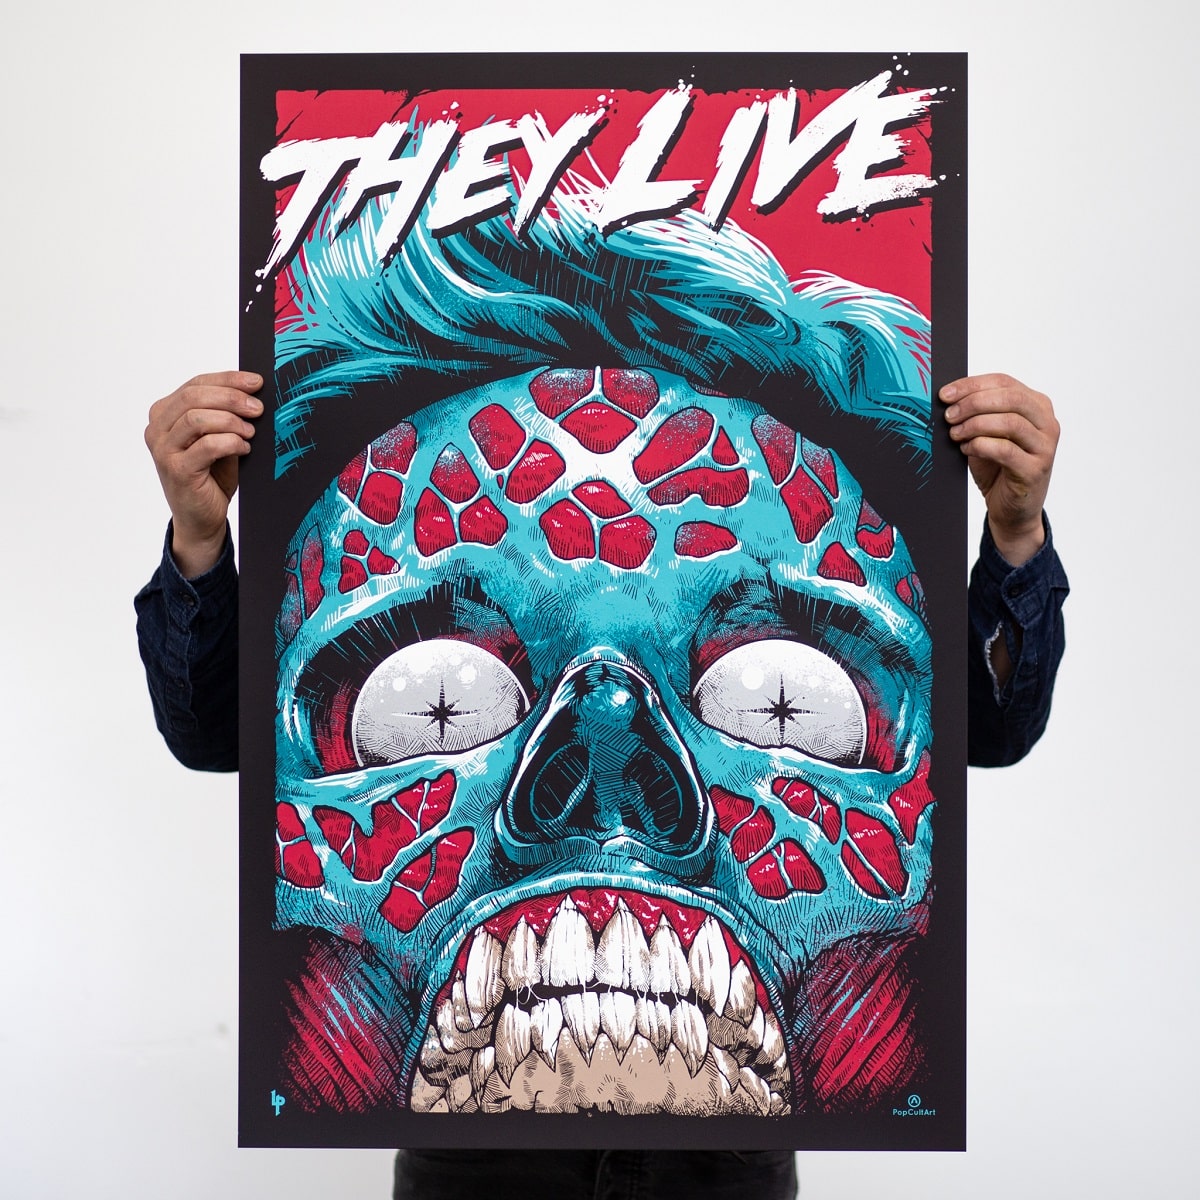 THEY LIVE variant edition screenprint